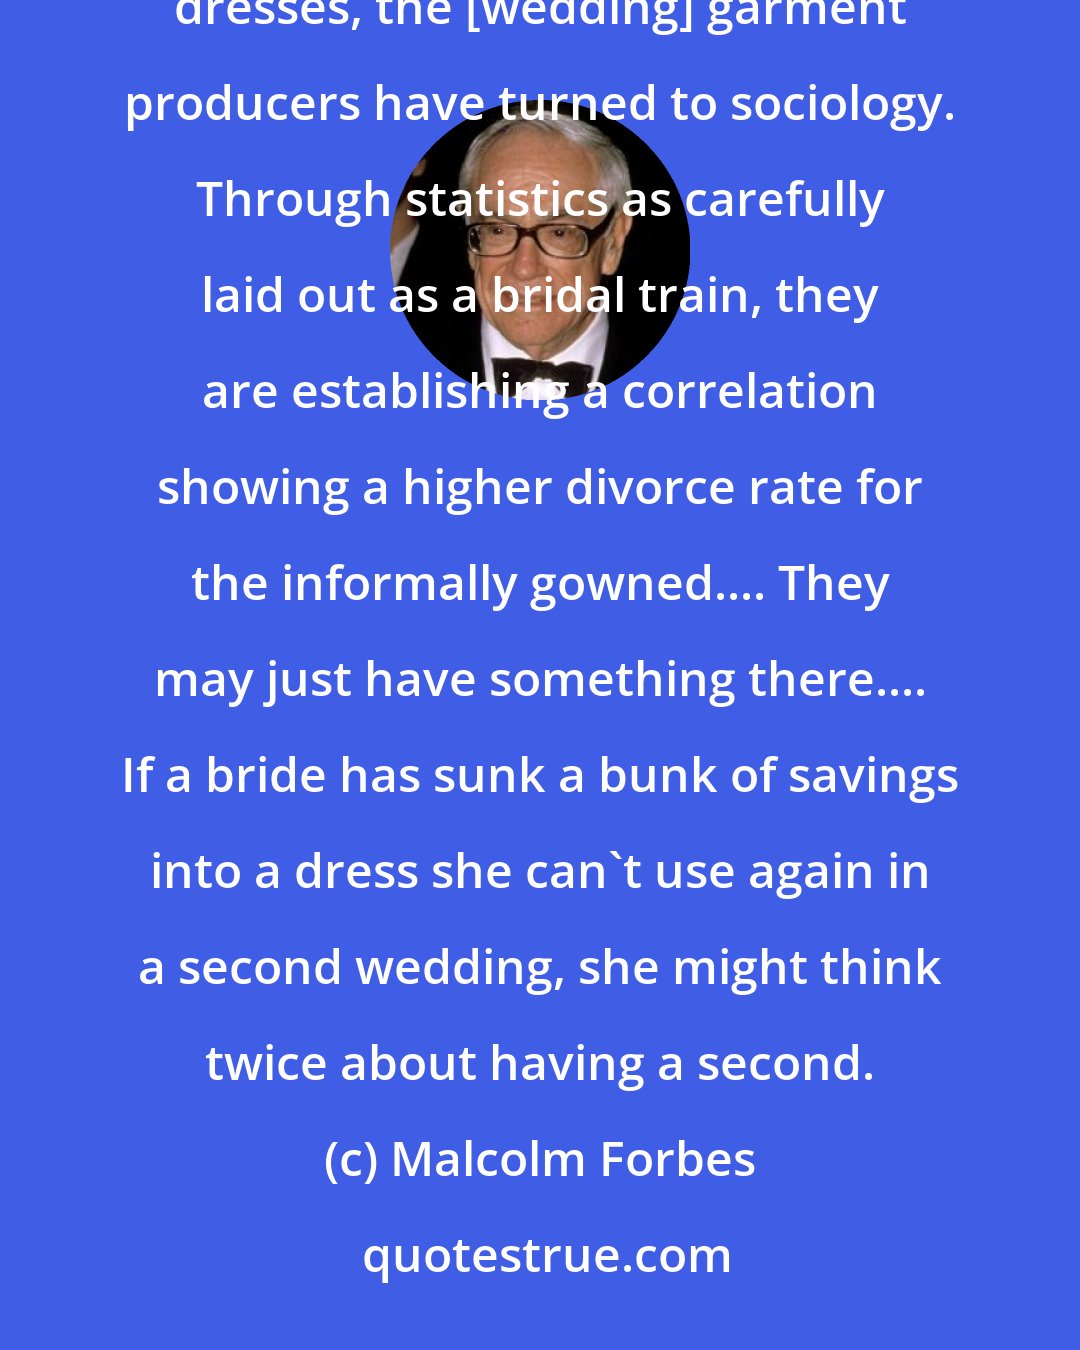 Malcolm Forbes: To switch lads and lassies from quickie ceremonies back to the catered works in to-be-worm-only-once white dresses, the [wedding] garment producers have turned to sociology. Through statistics as carefully laid out as a bridal train, they are establishing a correlation showing a higher divorce rate for the informally gowned.... They may just have something there.... If a bride has sunk a bunk of savings into a dress she can't use again in a second wedding, she might think twice about having a second.